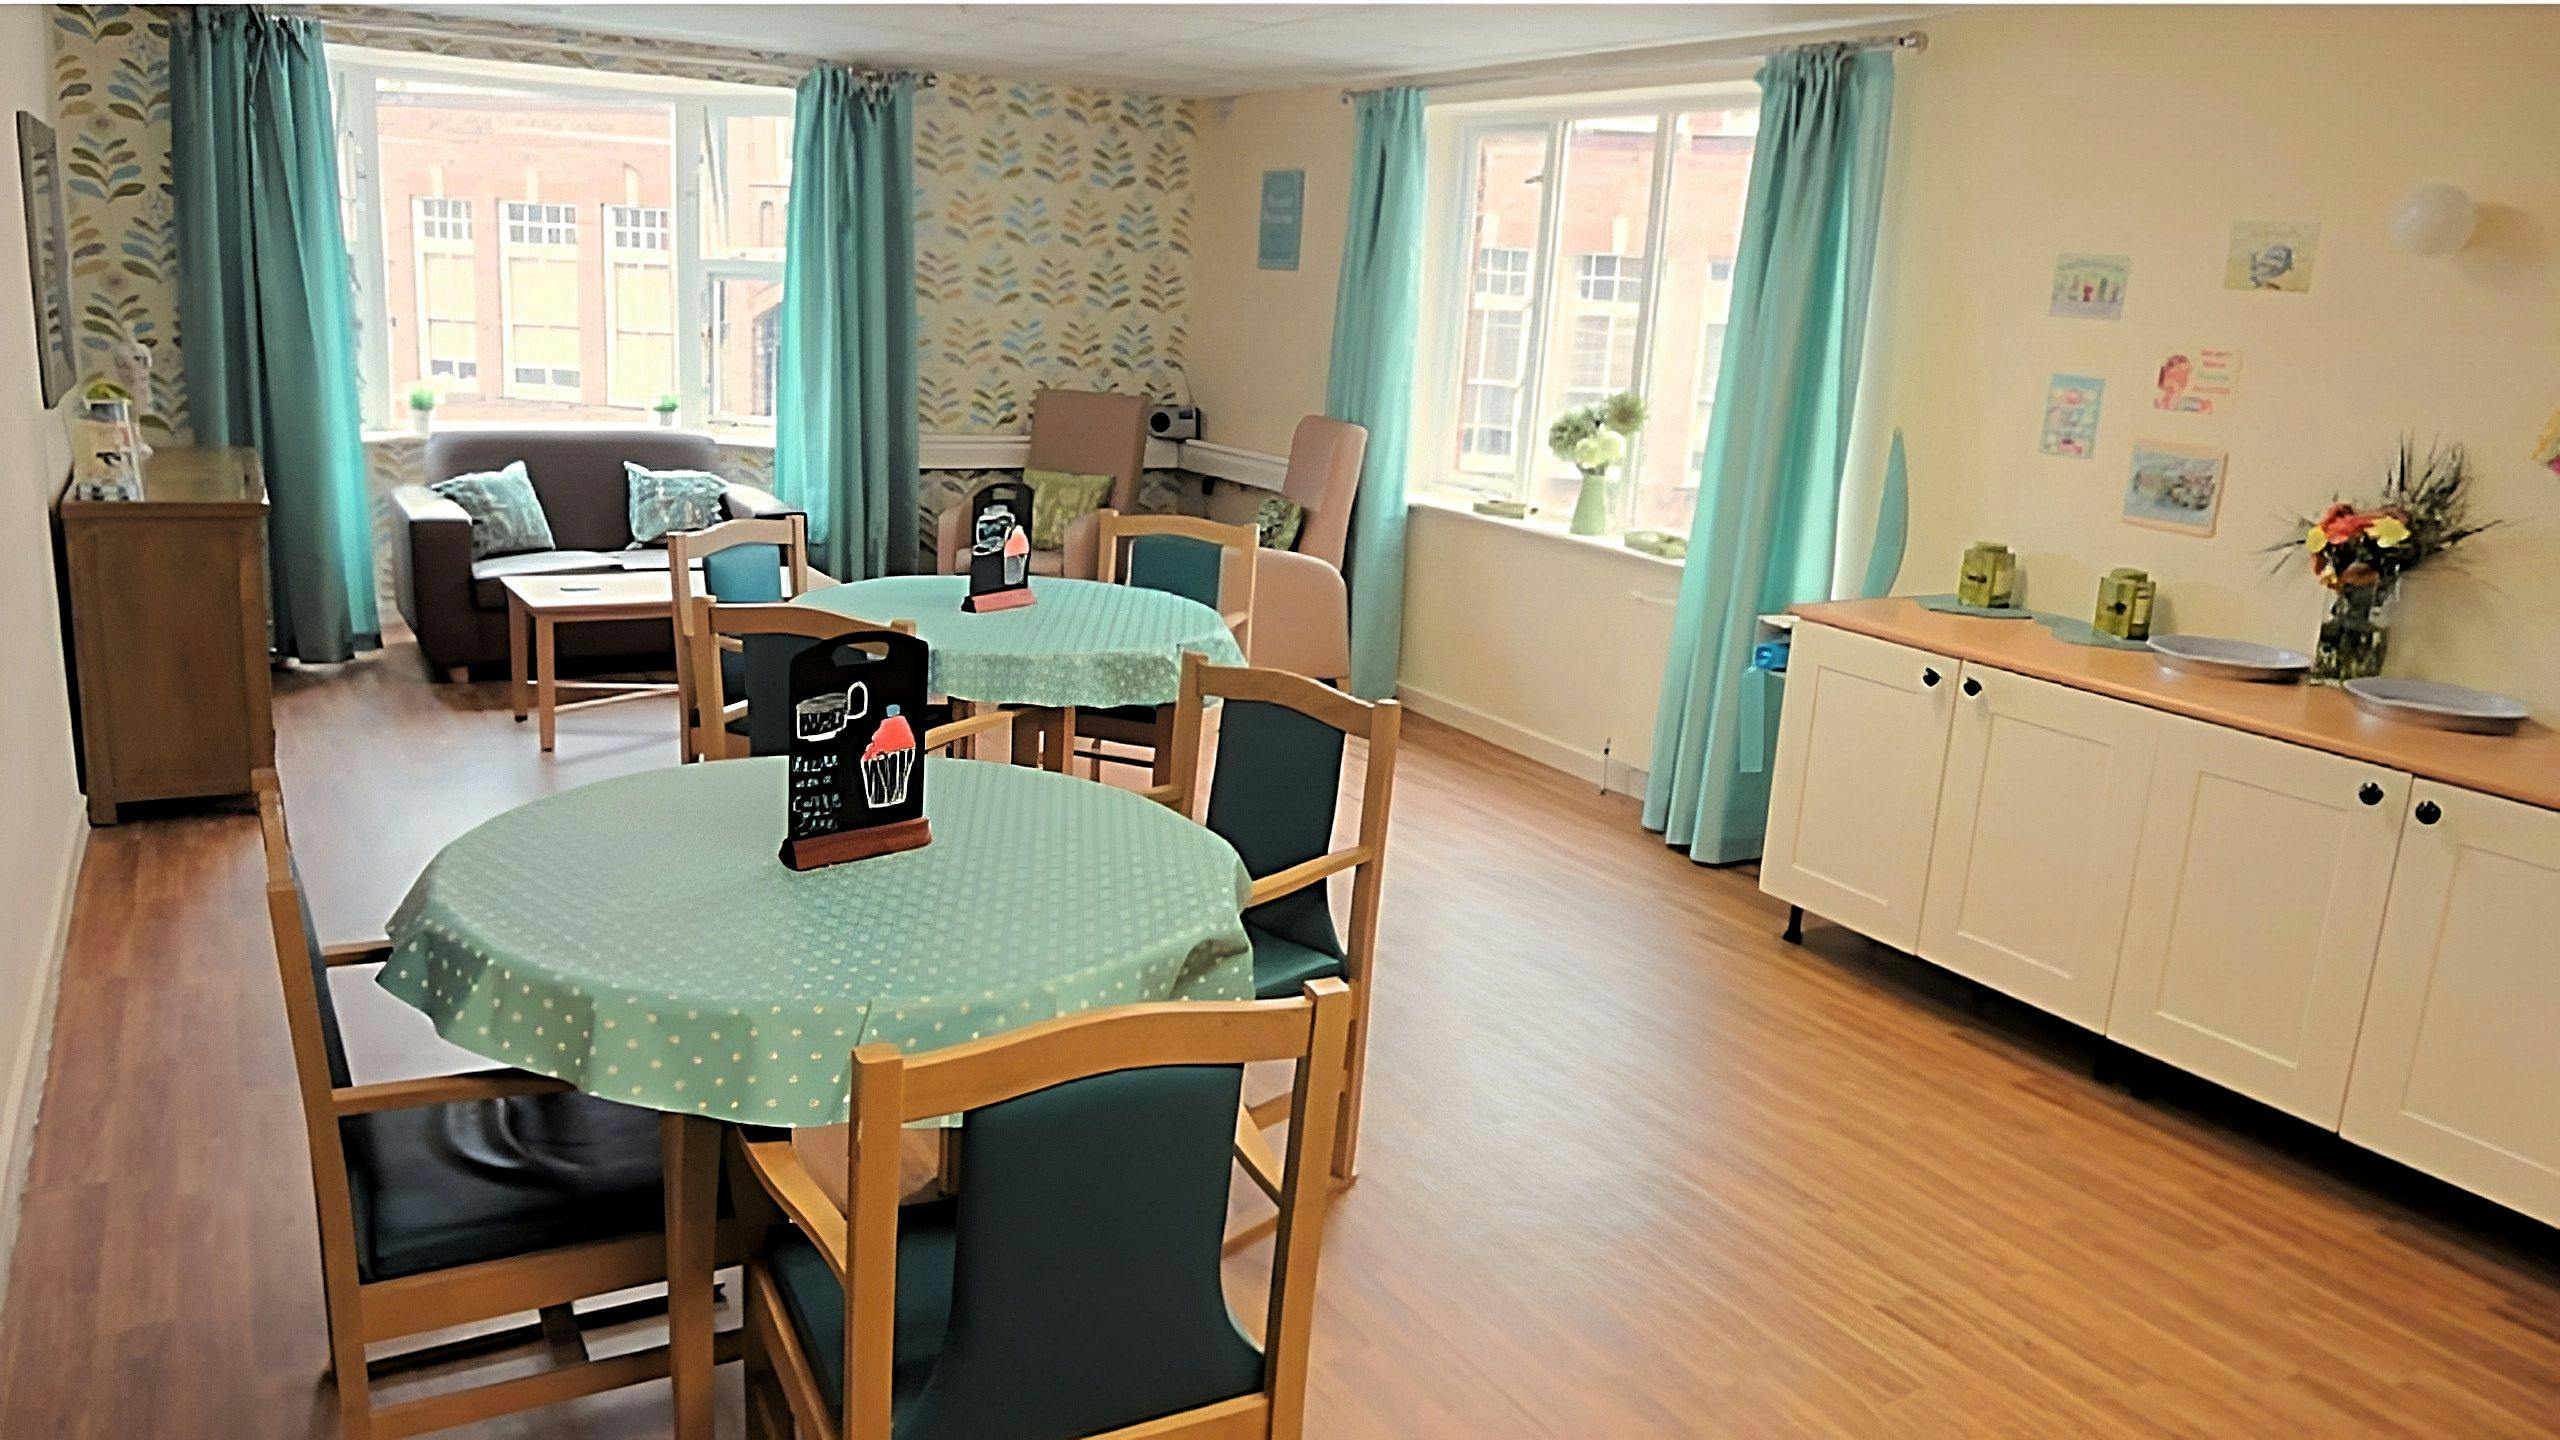 The dining area at Barnes Court Care Home in Sunderland, Tyne and Wear